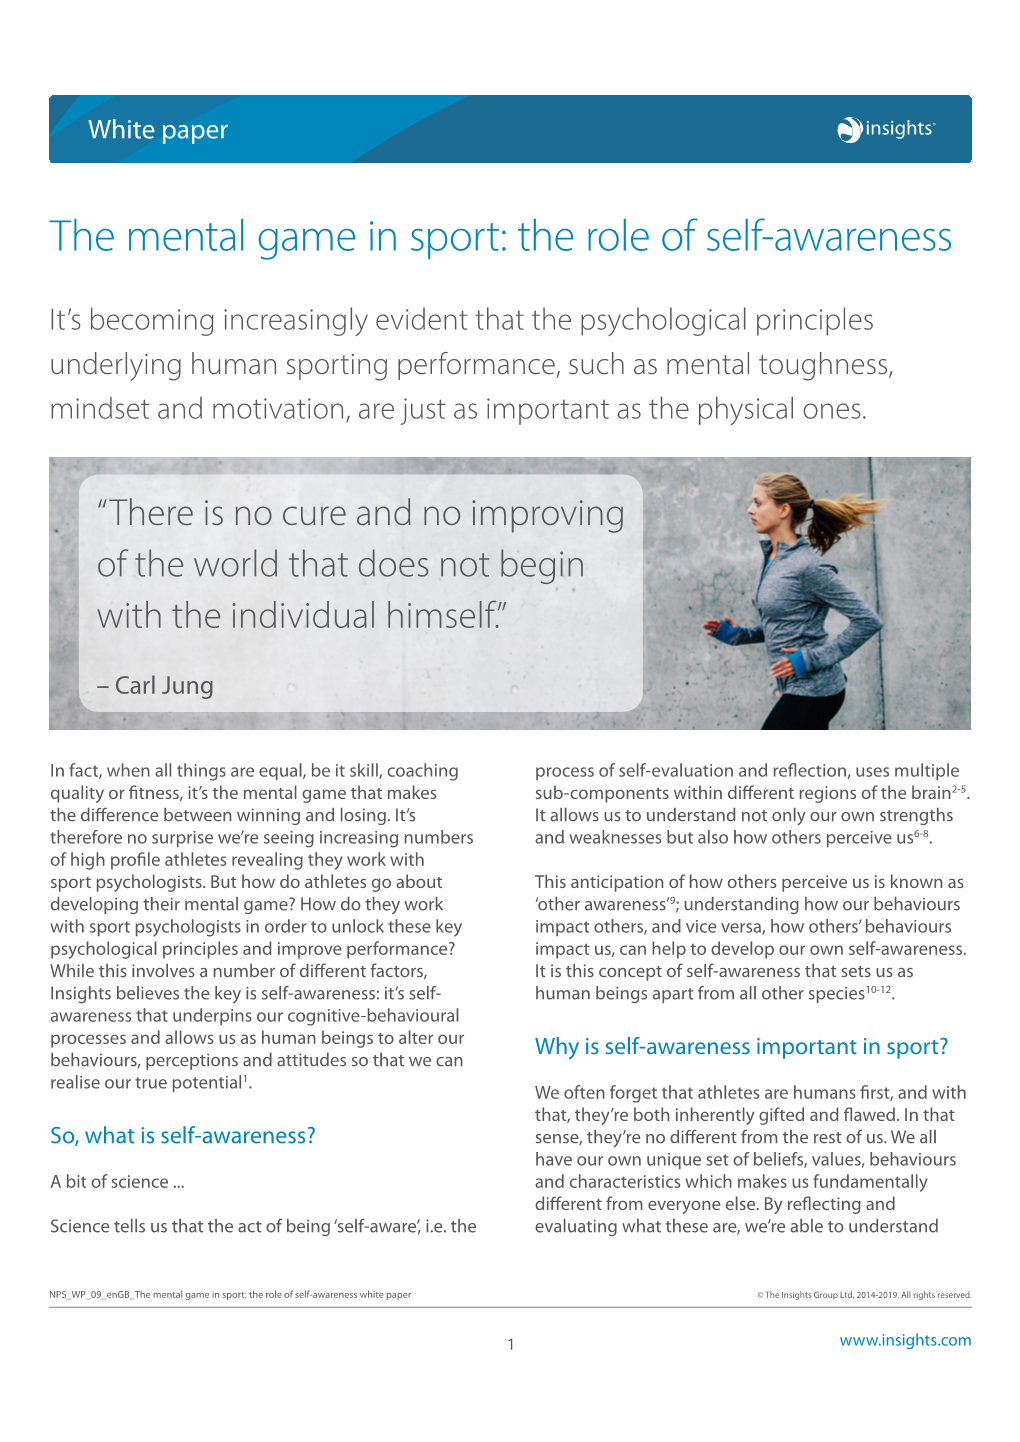 The Mental Game in Sport: the Role of Self-Awareness